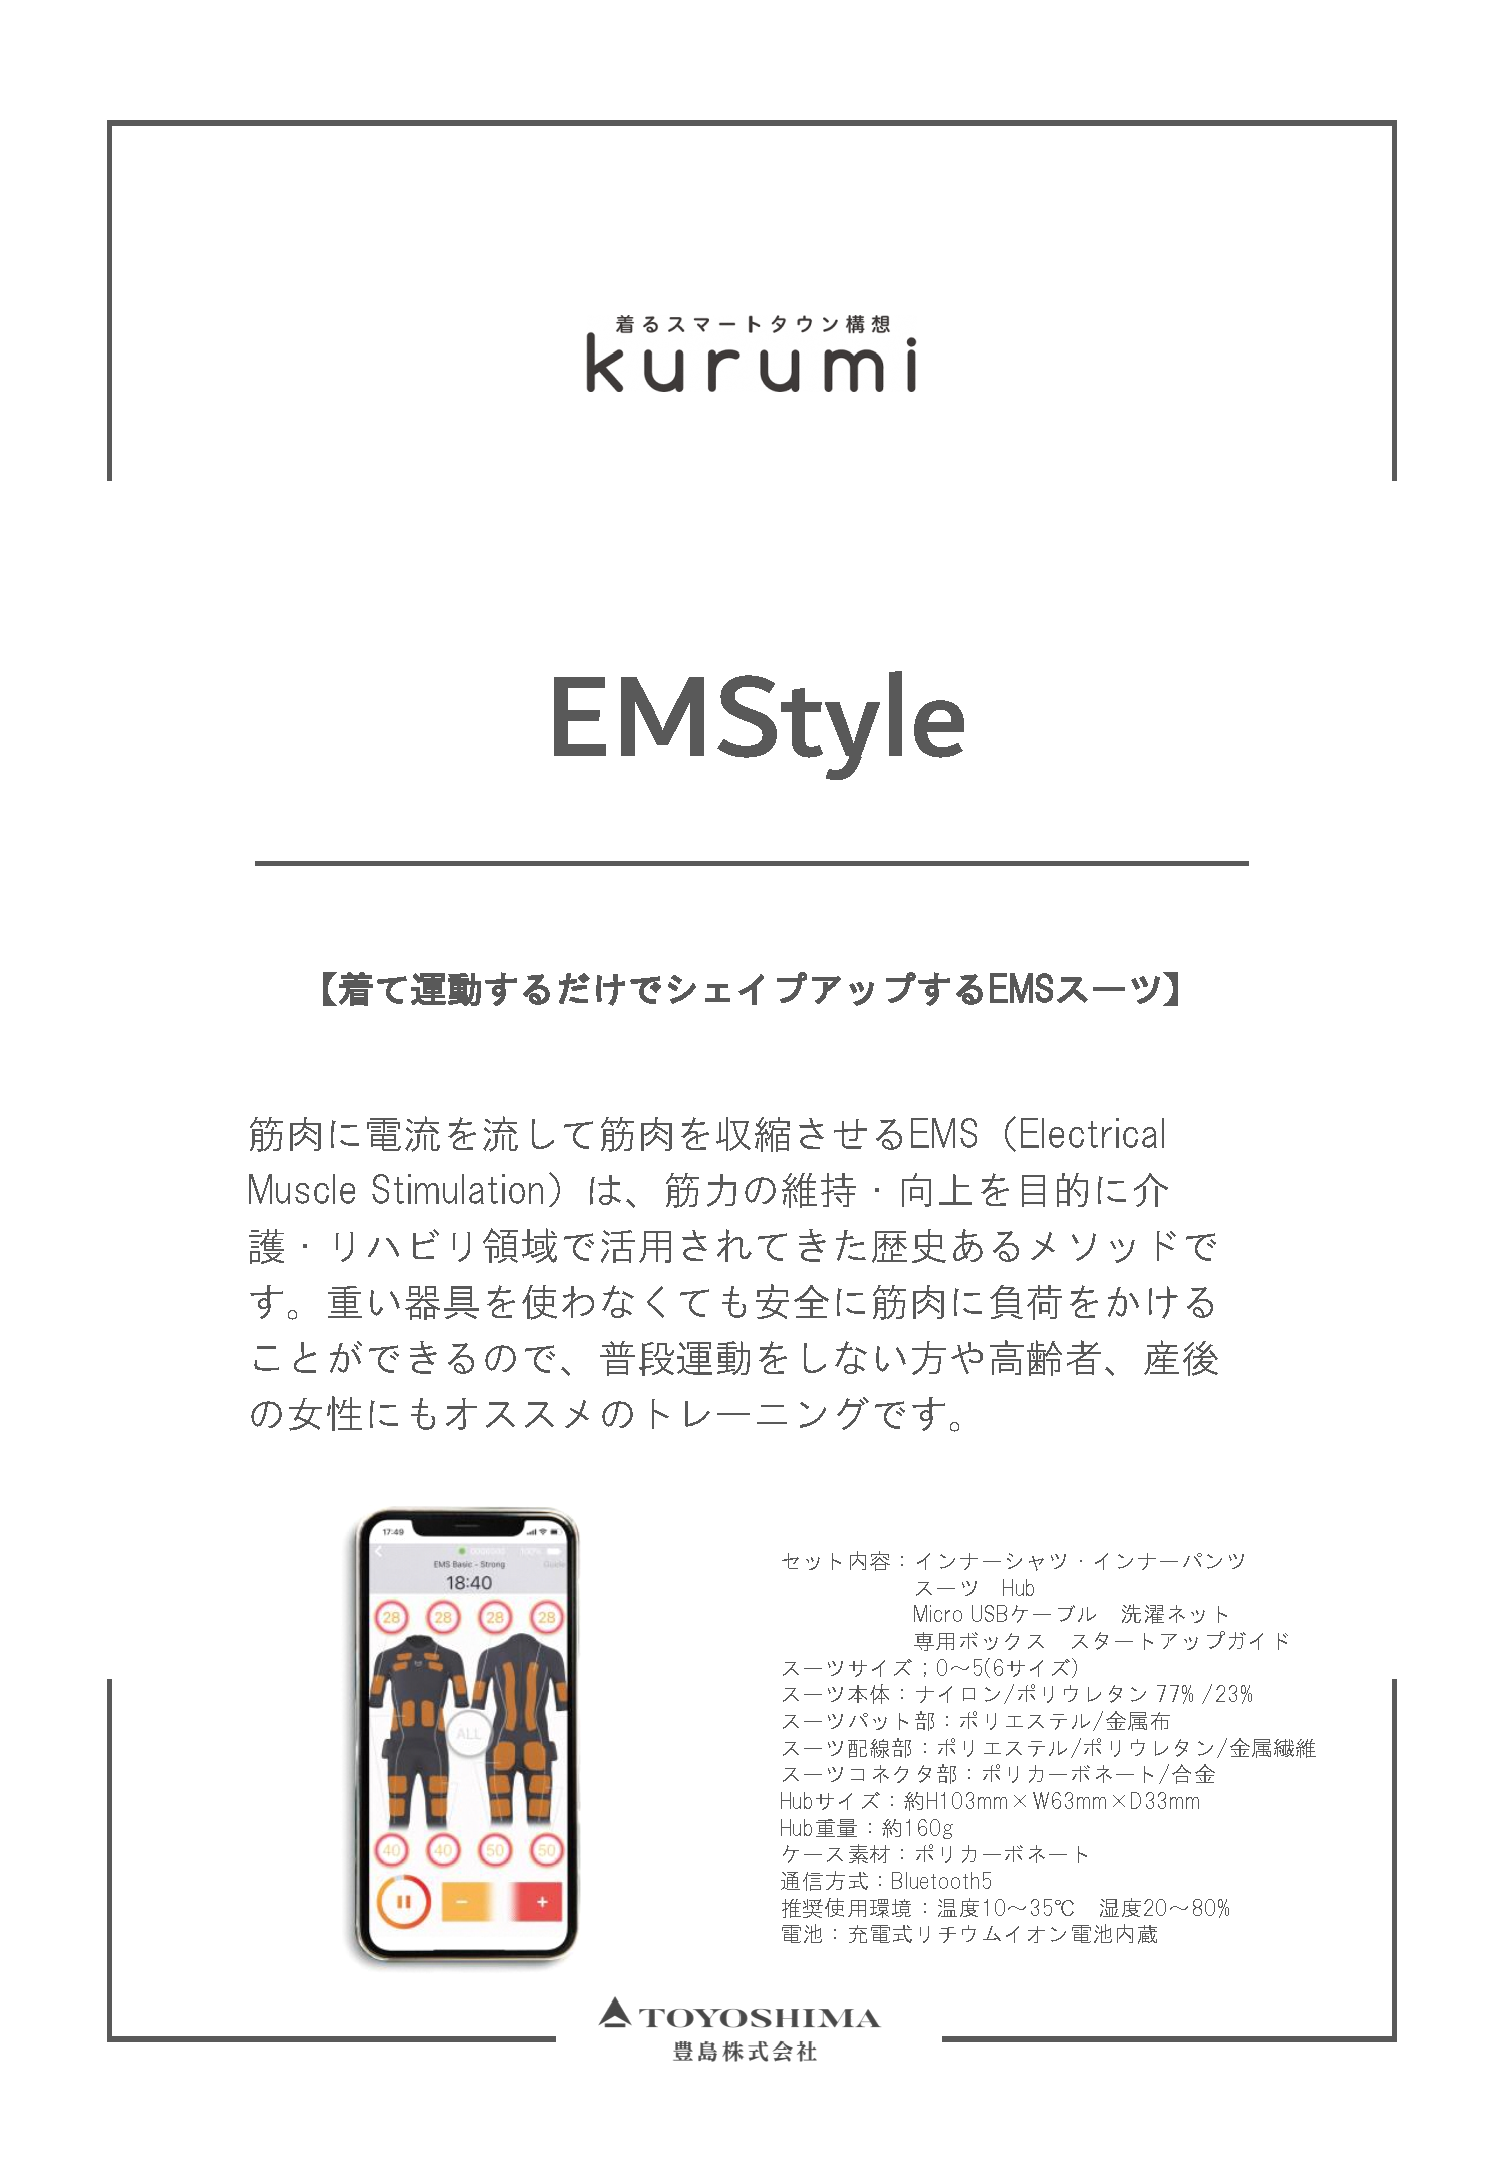 EMStyle